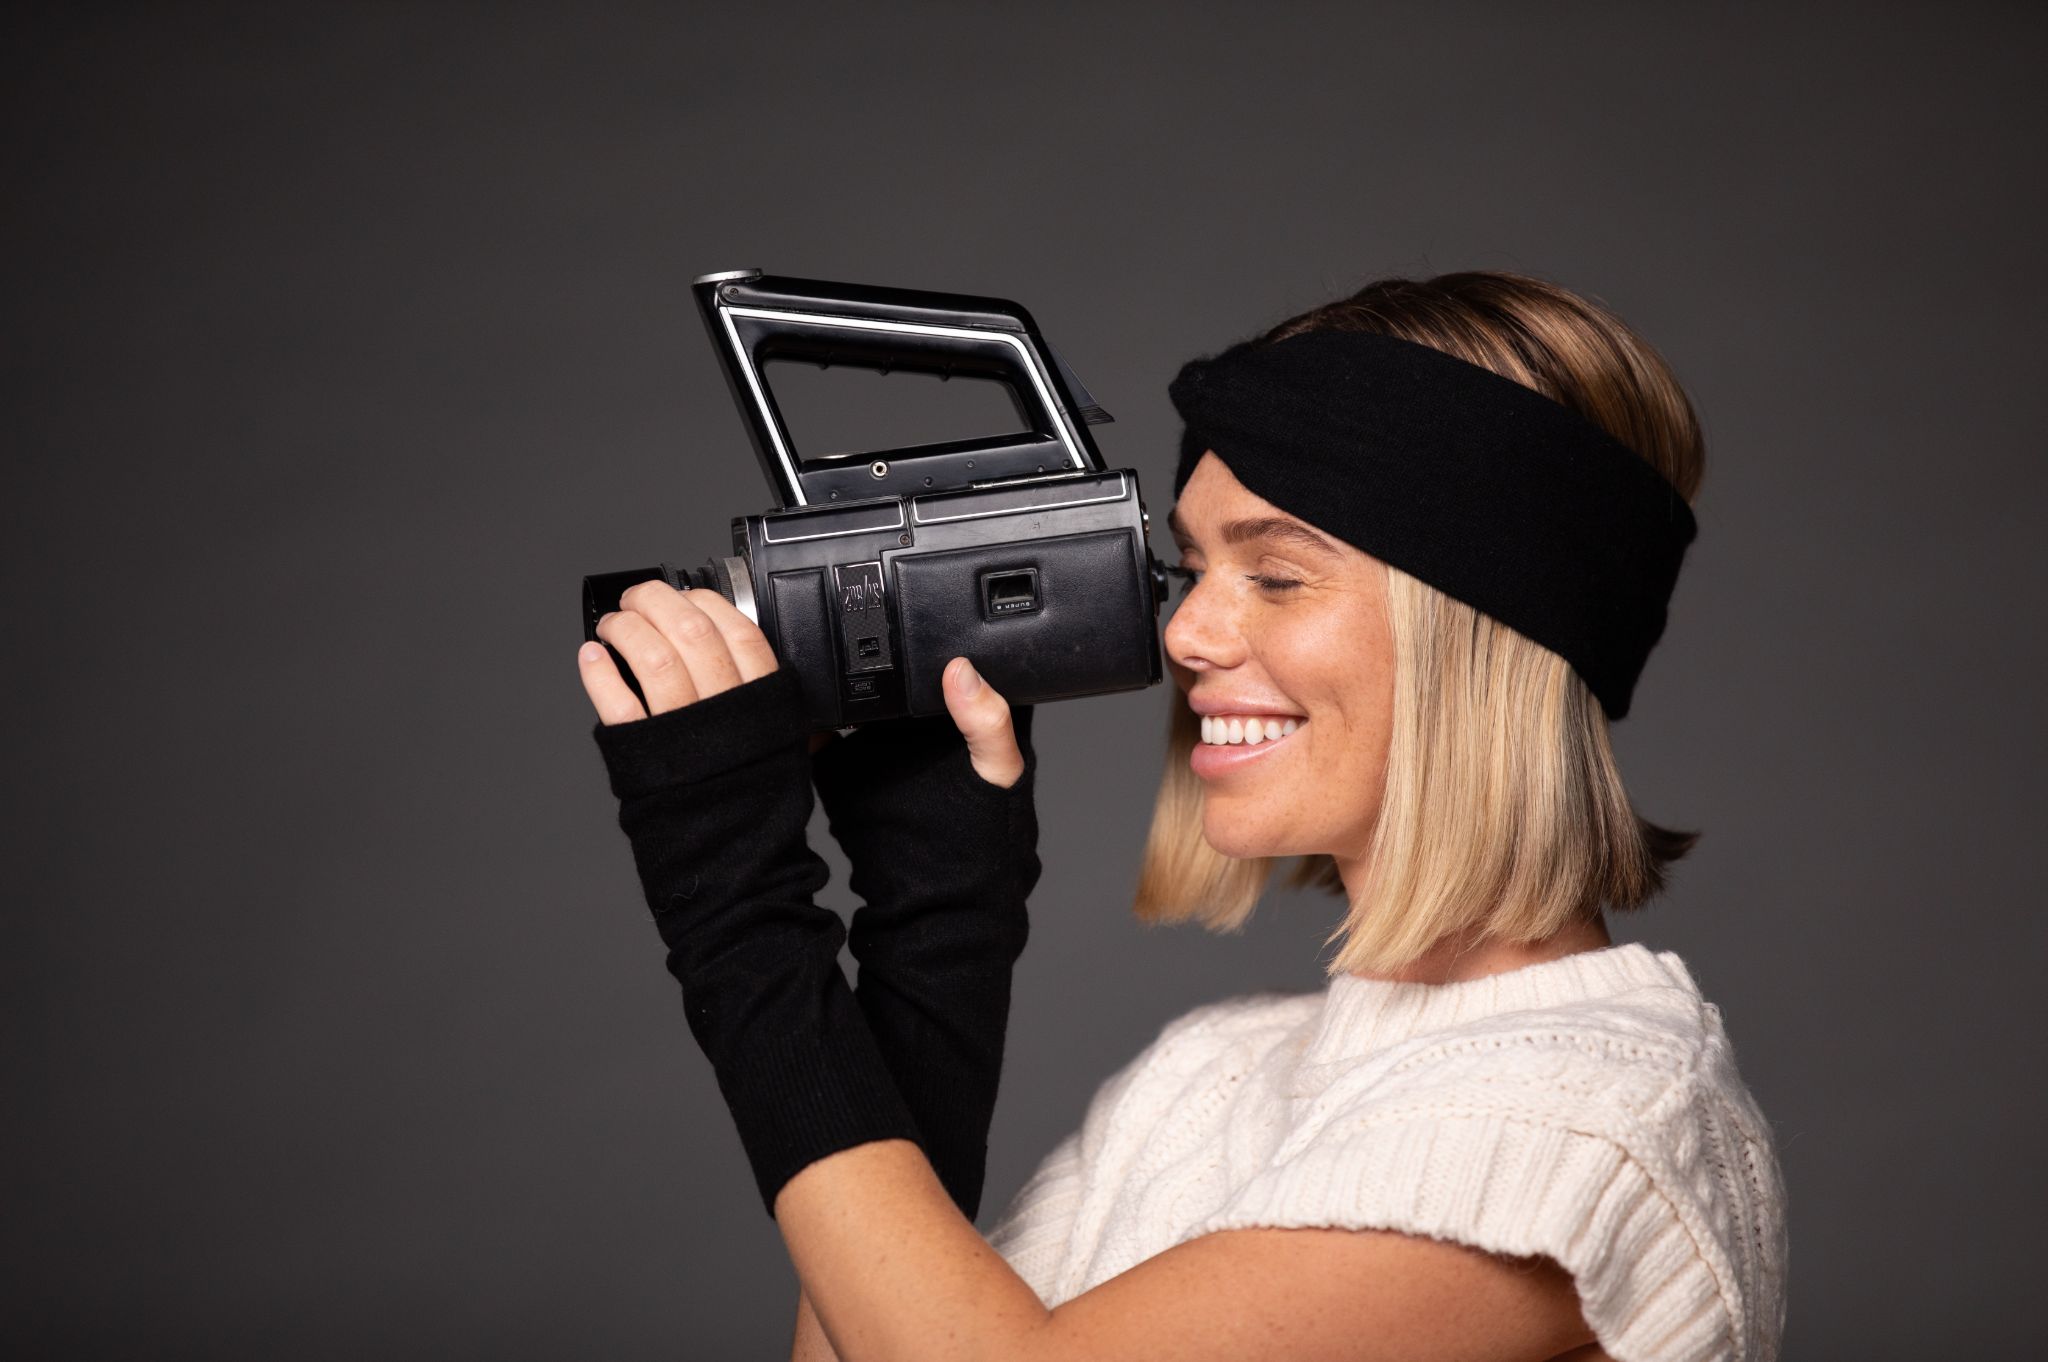 Side profile of woman with long blond hair smiling and using a video camera wearing a black headband, hand sleeves and white cropped sweater against a gray backdrop